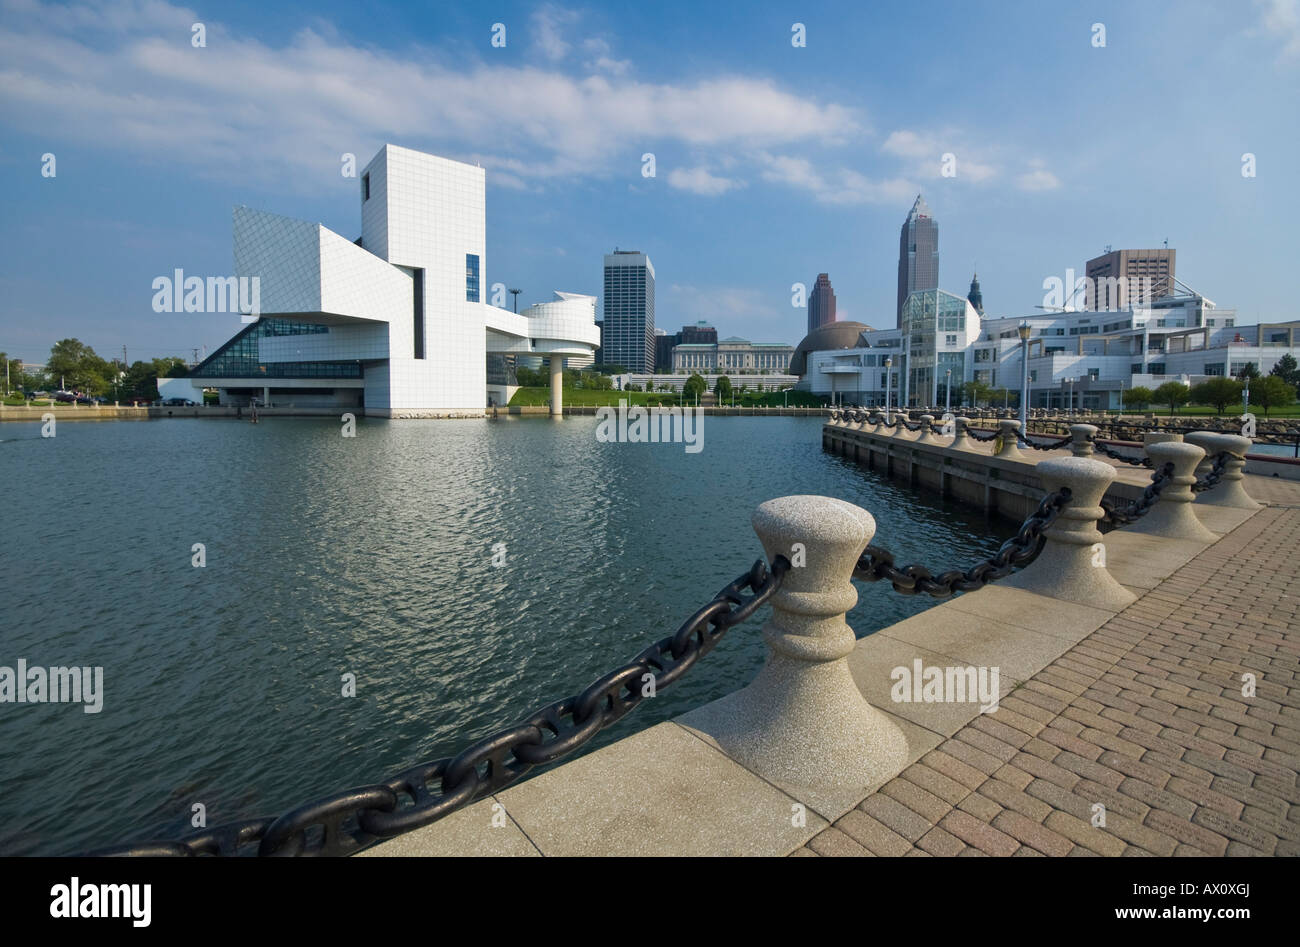 USA, Ohio, Cleveland, Rock and Roll Hall of Fame Stock Photo